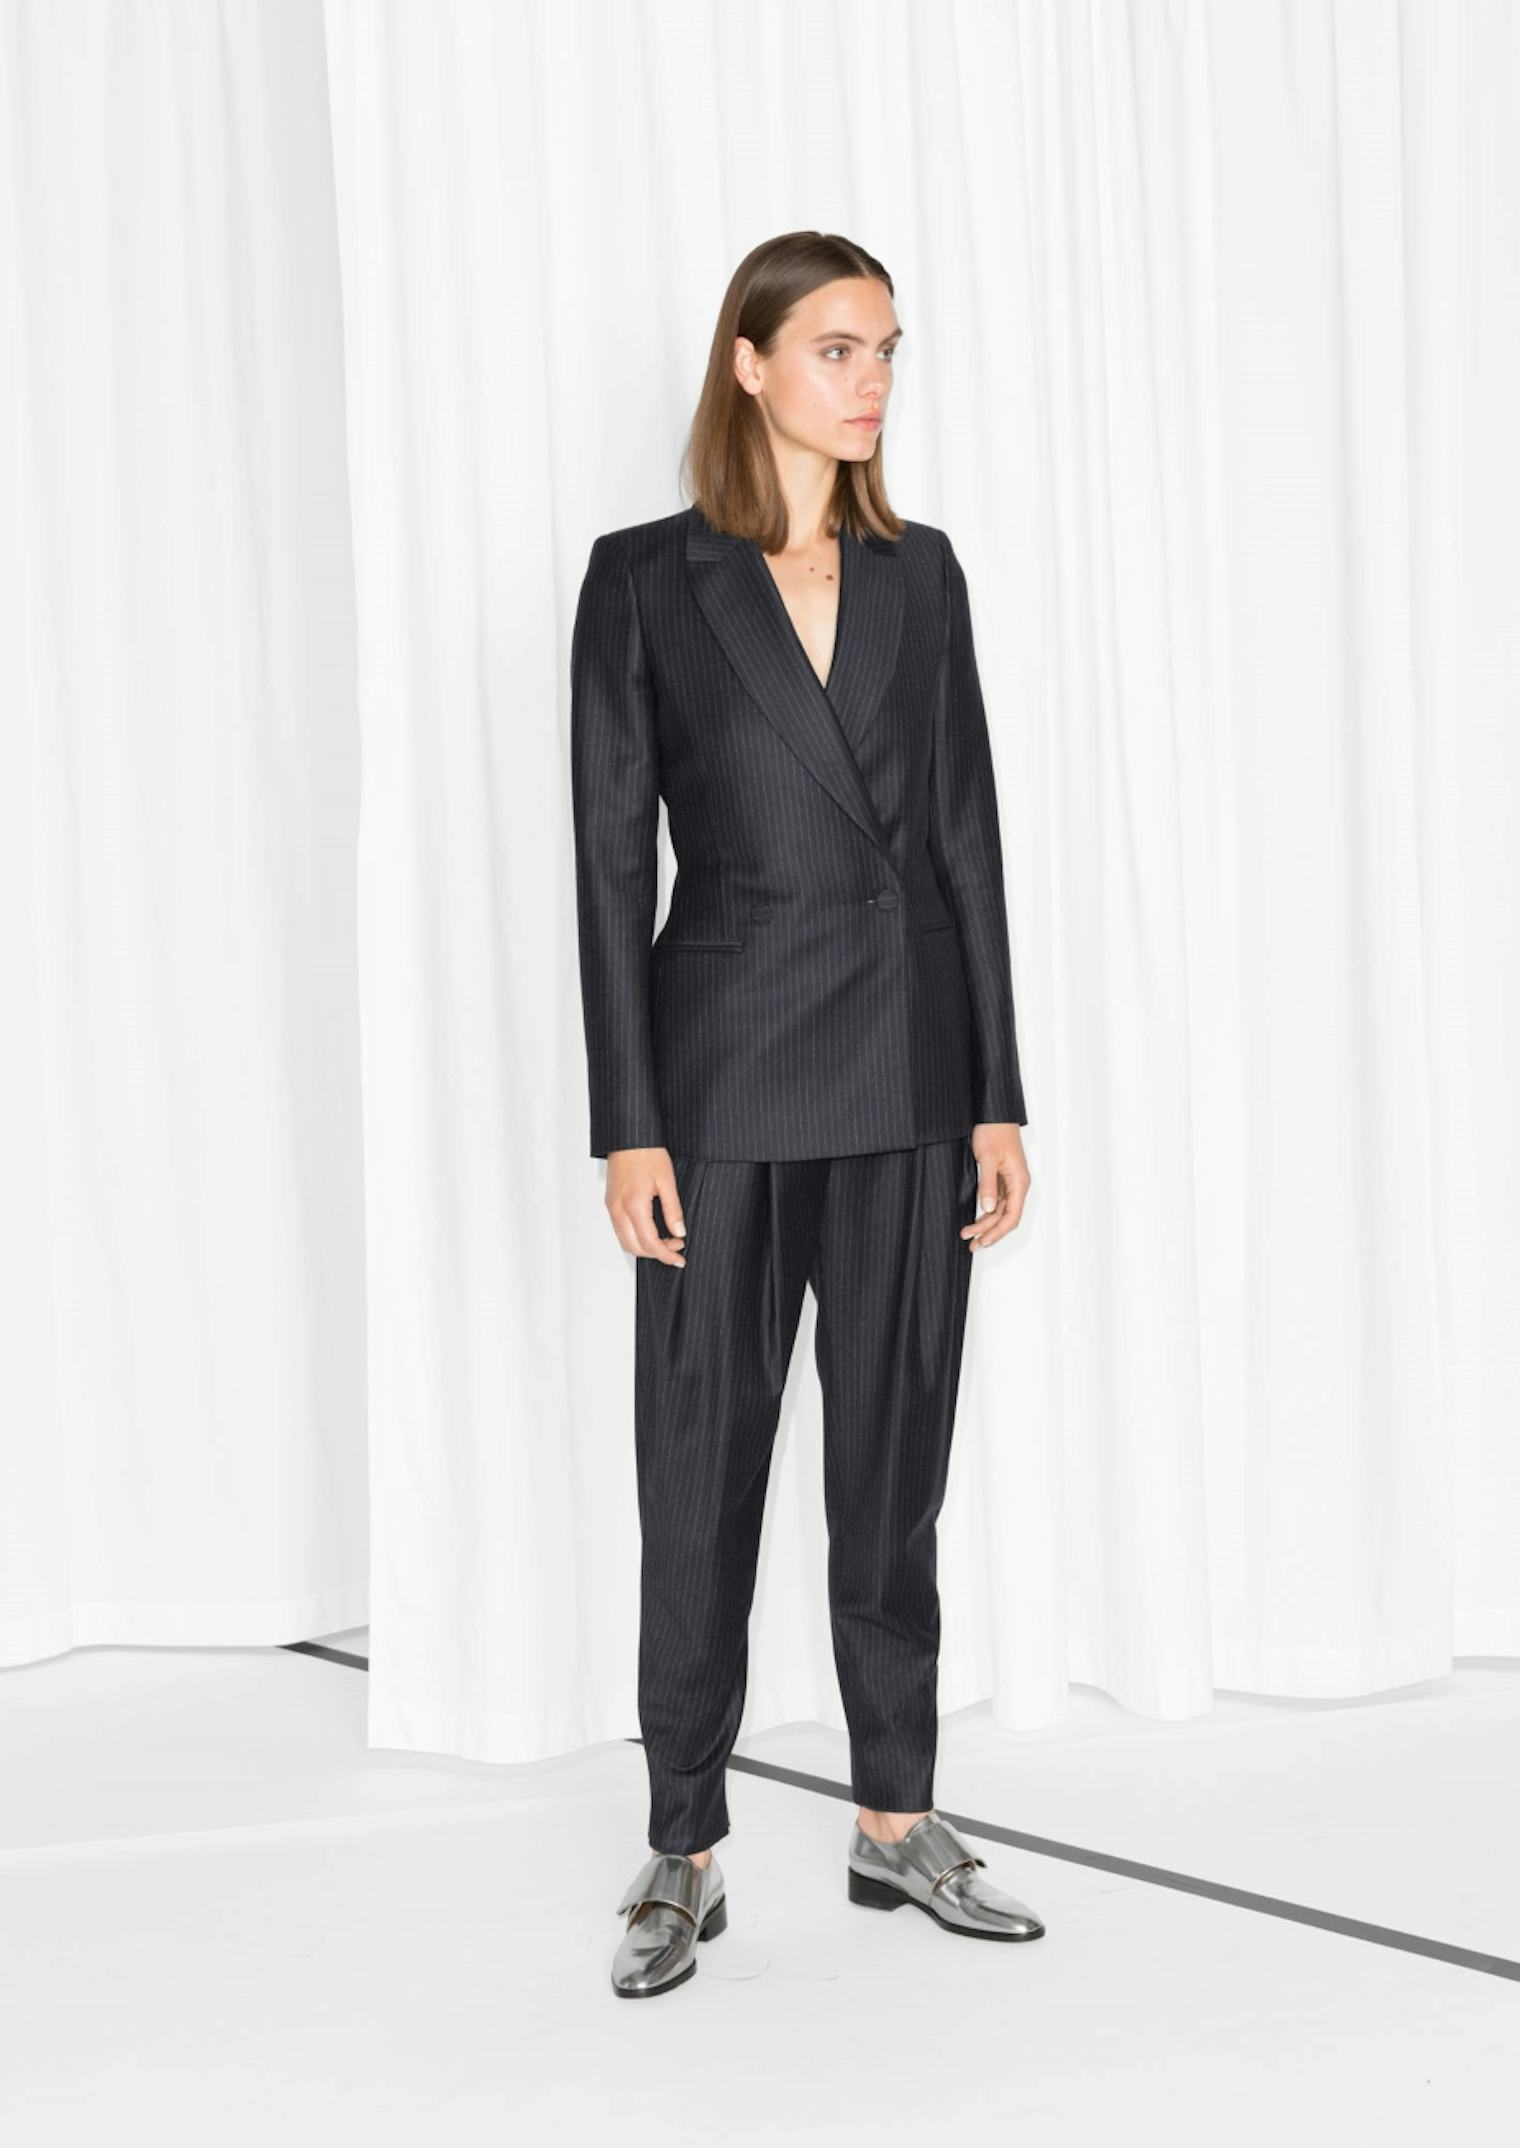 Power Suits Are Trending For Fall 2015 As Evidenced By All Of Our